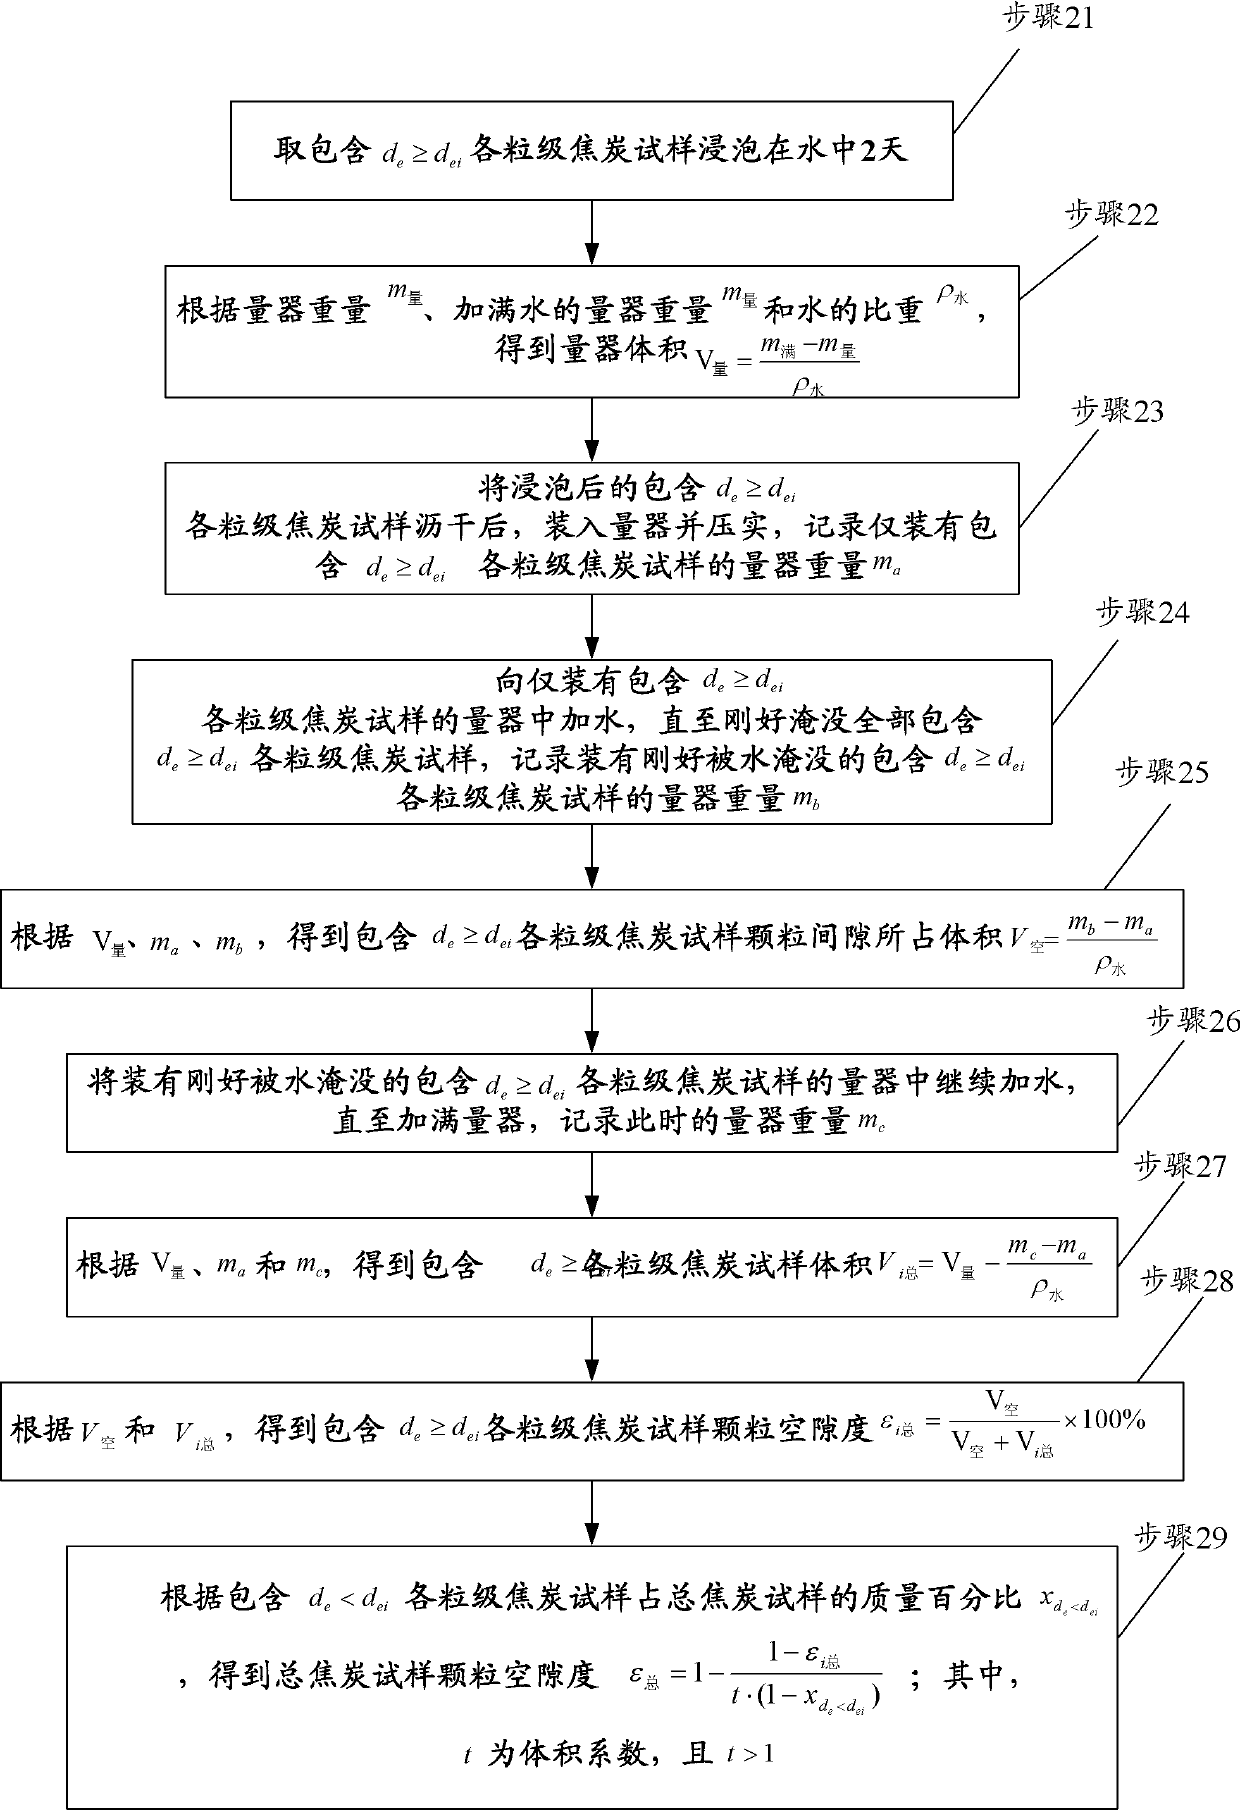 Method for measuring permeability index of front coke or carbocoal of COREX or blast-furnace tuyere